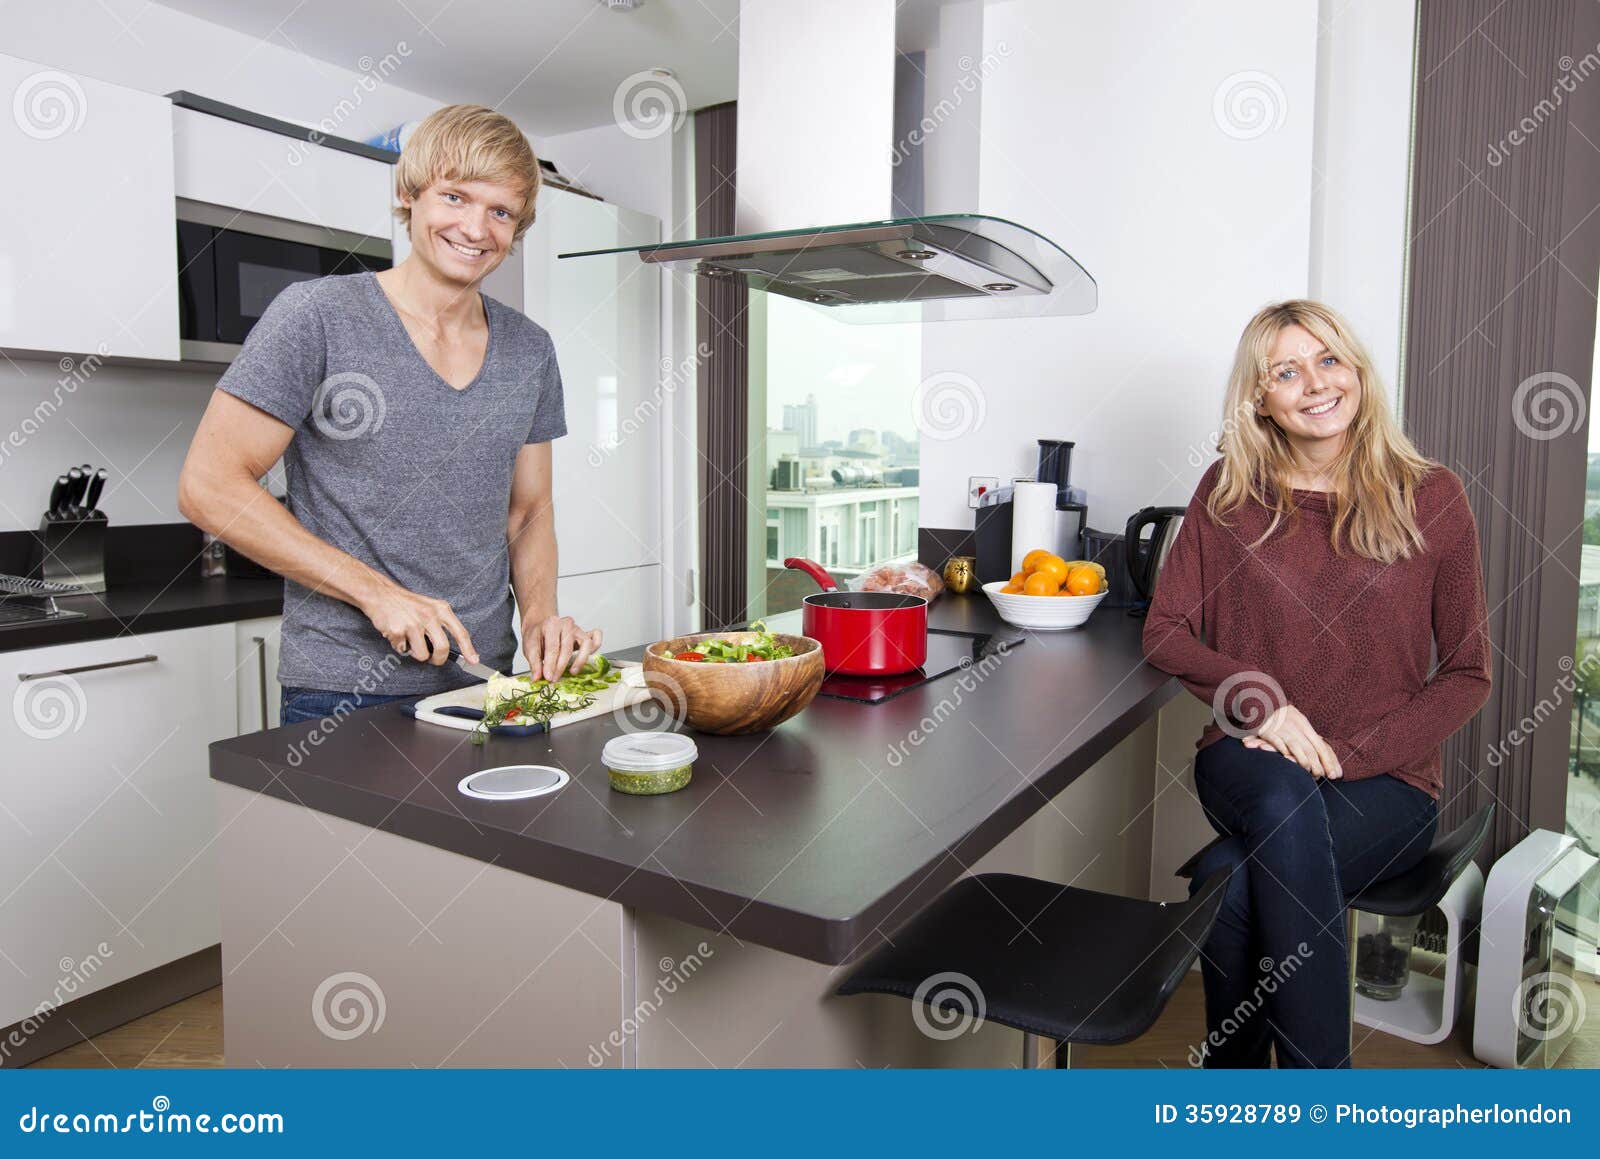 Portrait Of Happy Man Cutting Vegetables While Woman Sitting At